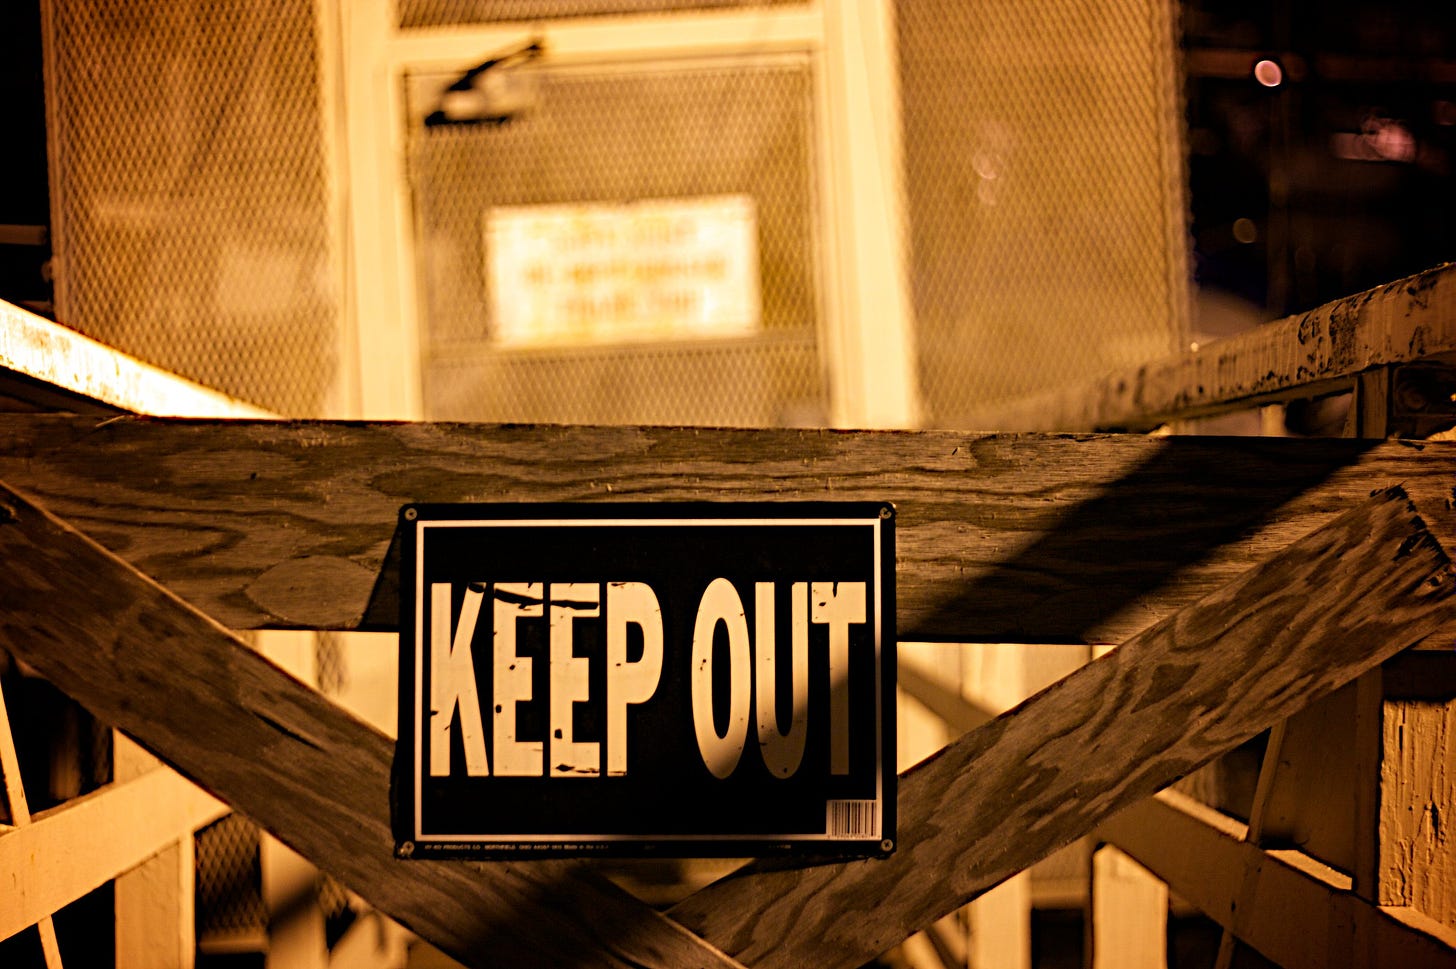 Keep Out sign